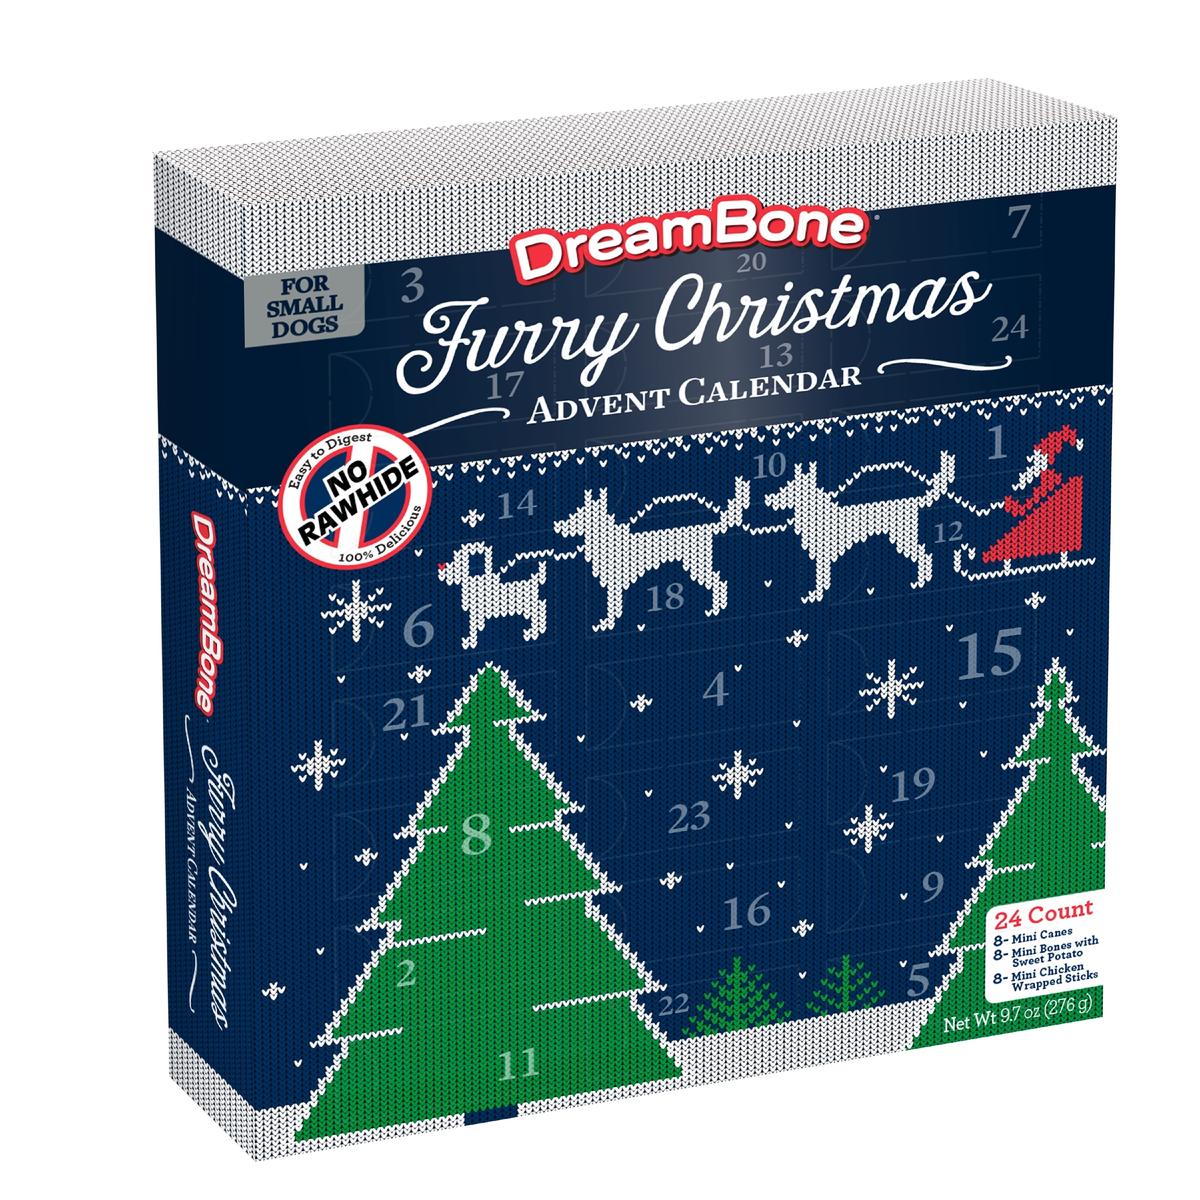 DreamBone Holiday Advent Calendar. (Courtesy of Chewy)